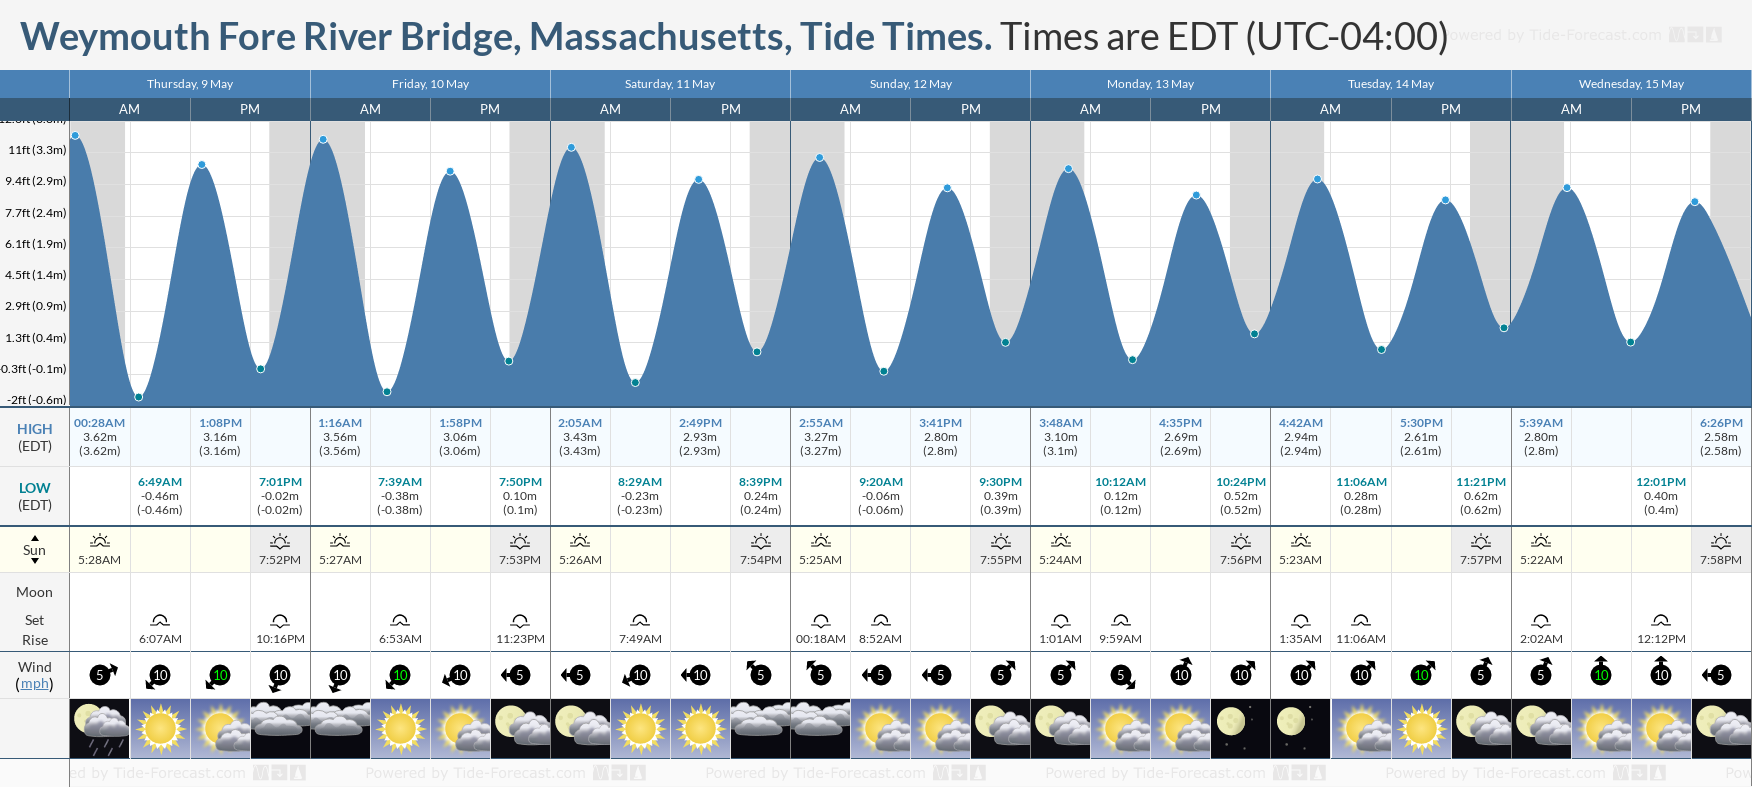 Weymouth Fore River Bridge, Massachusetts Tide Chart including high and low tide tide times for the next 7 days